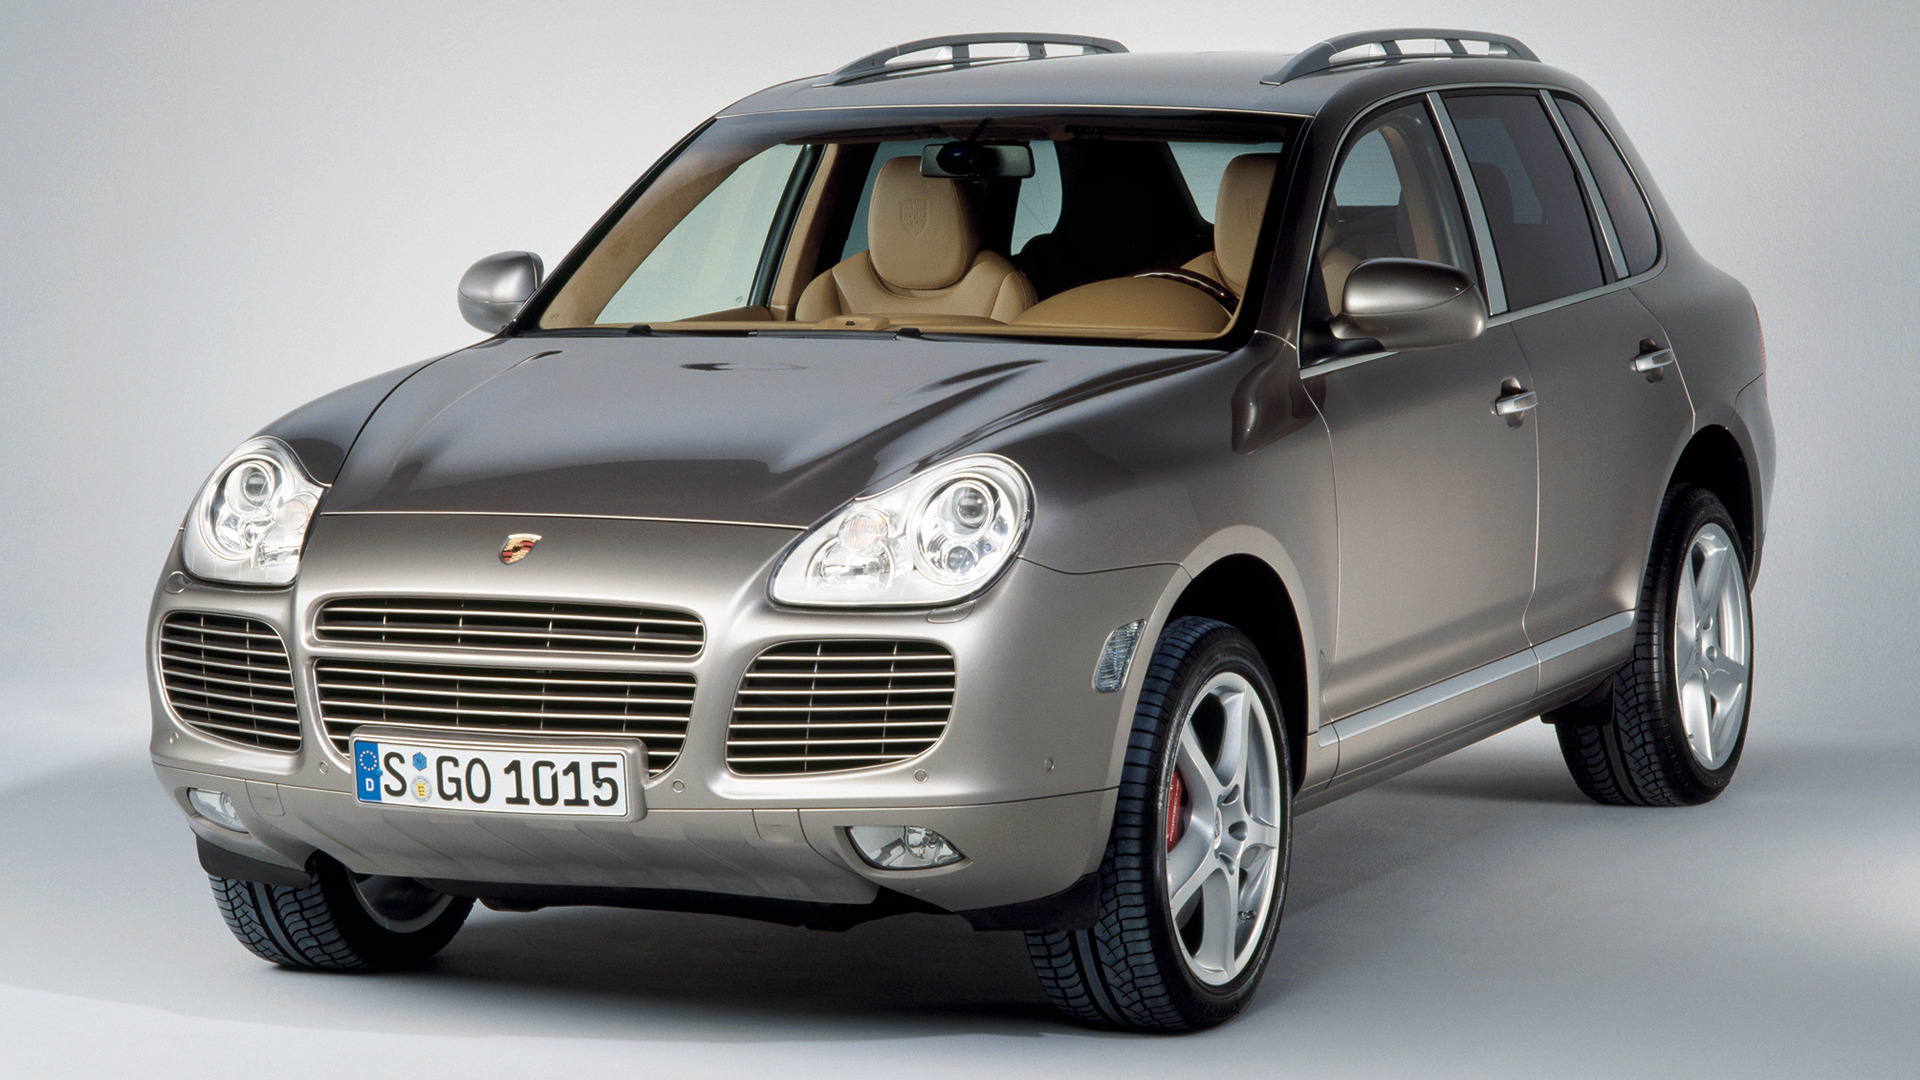 2006 Porsche Cayenne Turbo S Wallpapers And Hd Images